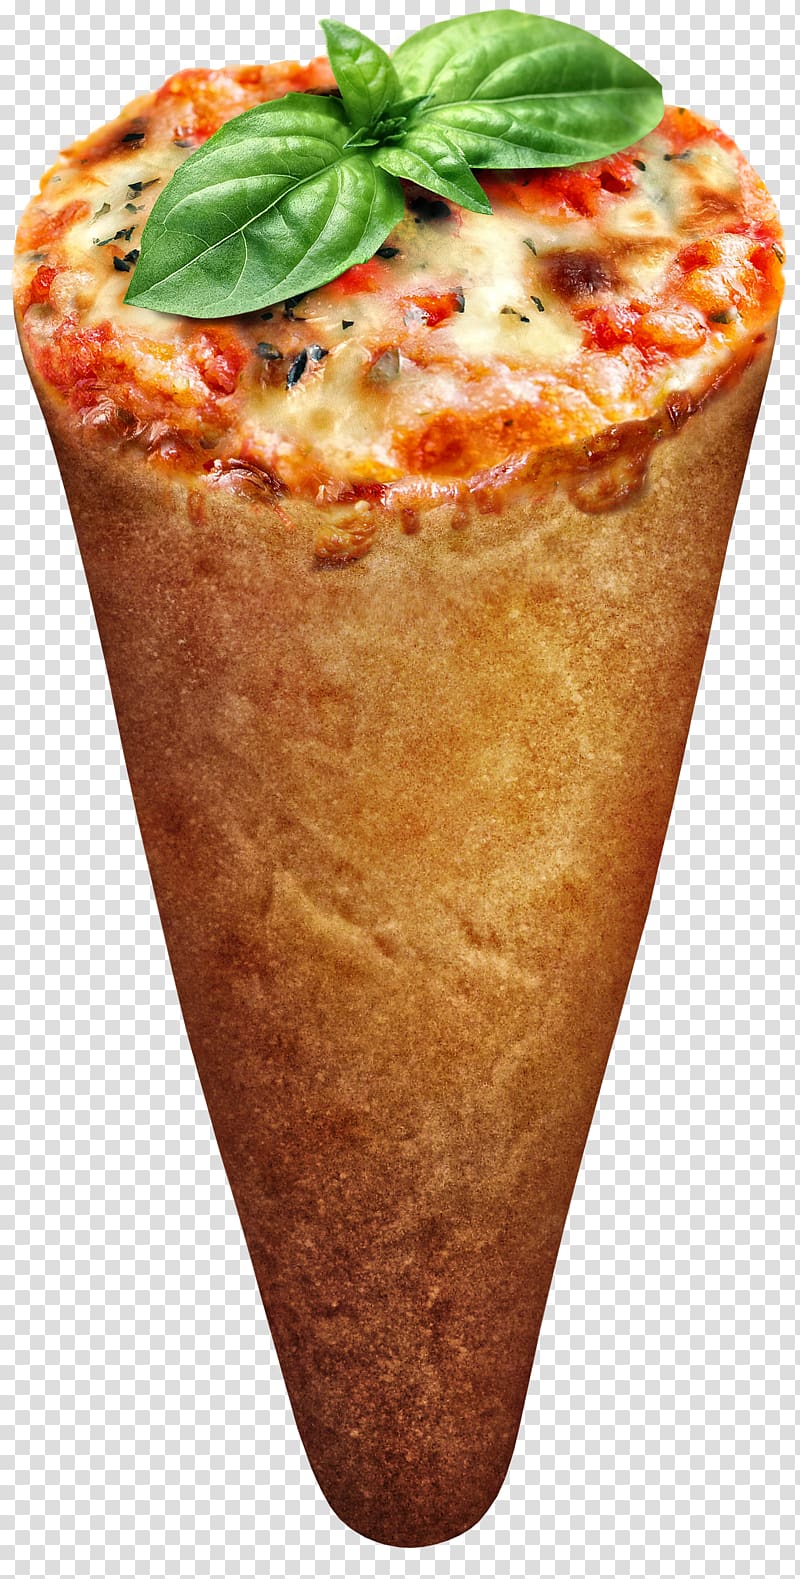 Pizza Margherita Meatball pizza L\'cone pizza Pizzaria, food truck transparent background PNG clipart